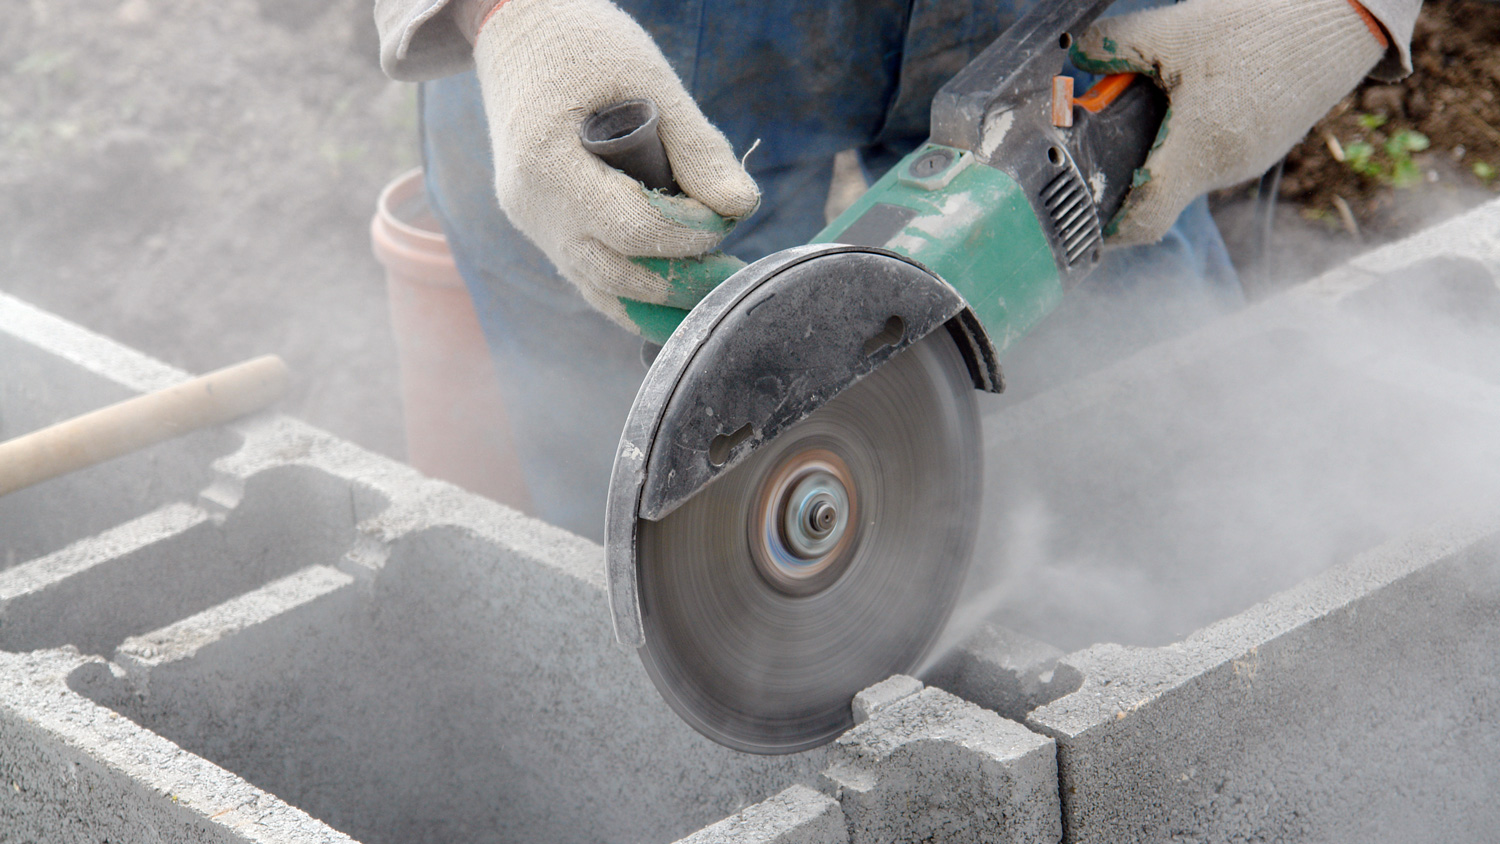 A worker grinding concrete causing dust